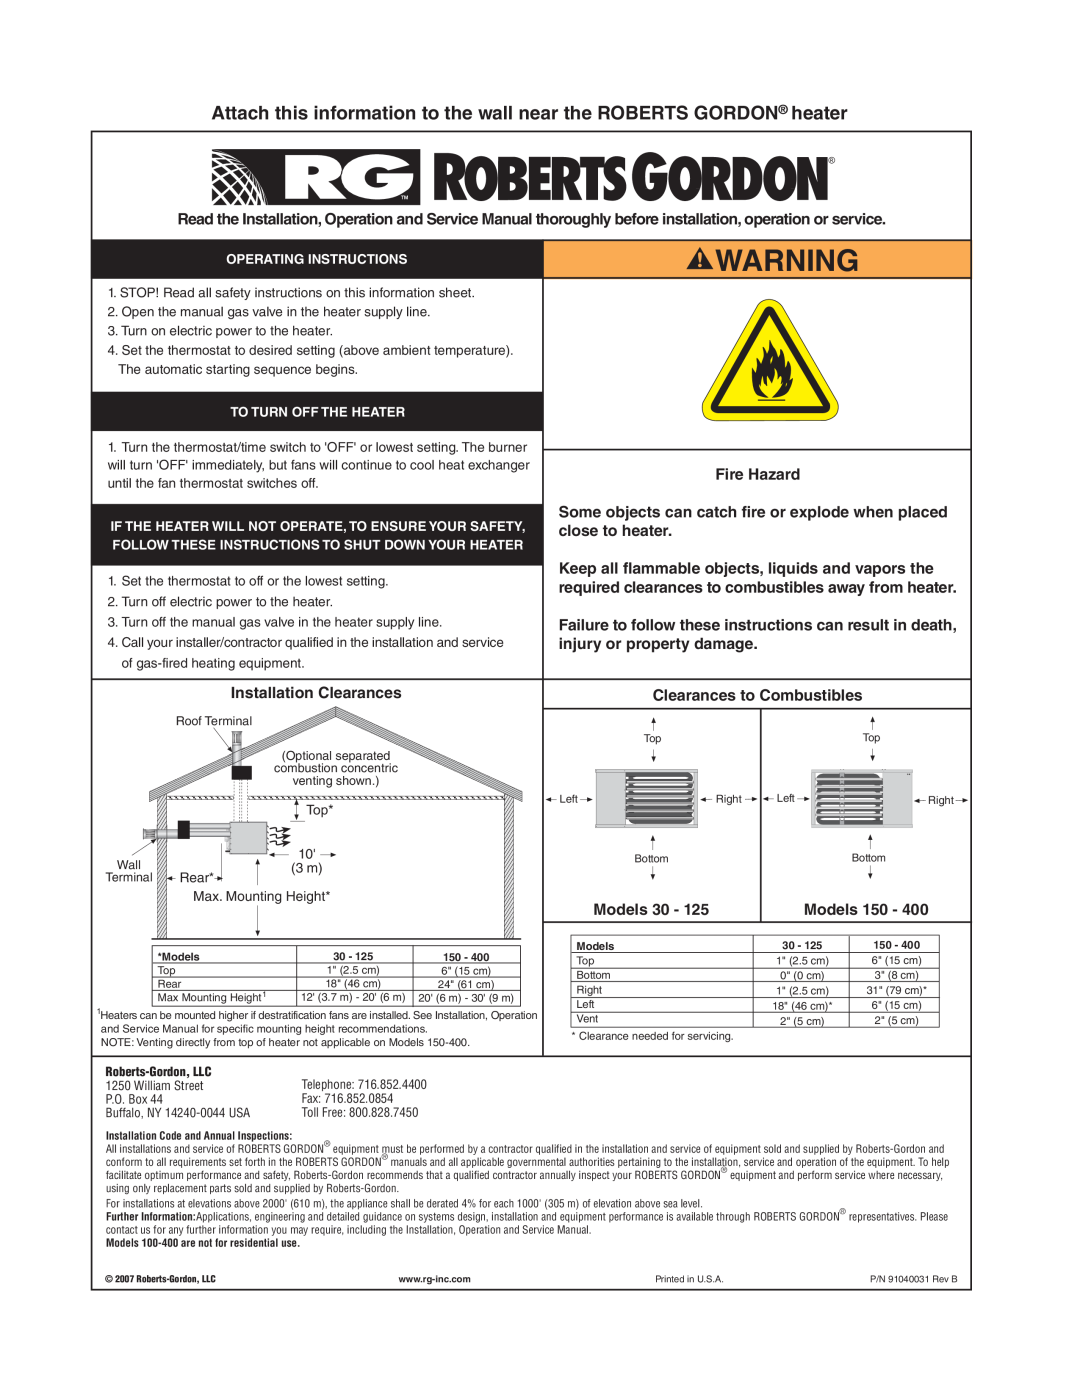 Roberts Gorden 125, 75, 100 Fire Hazard, close to heater, injury or property damage, Clearances to Combustibles, Models 150 